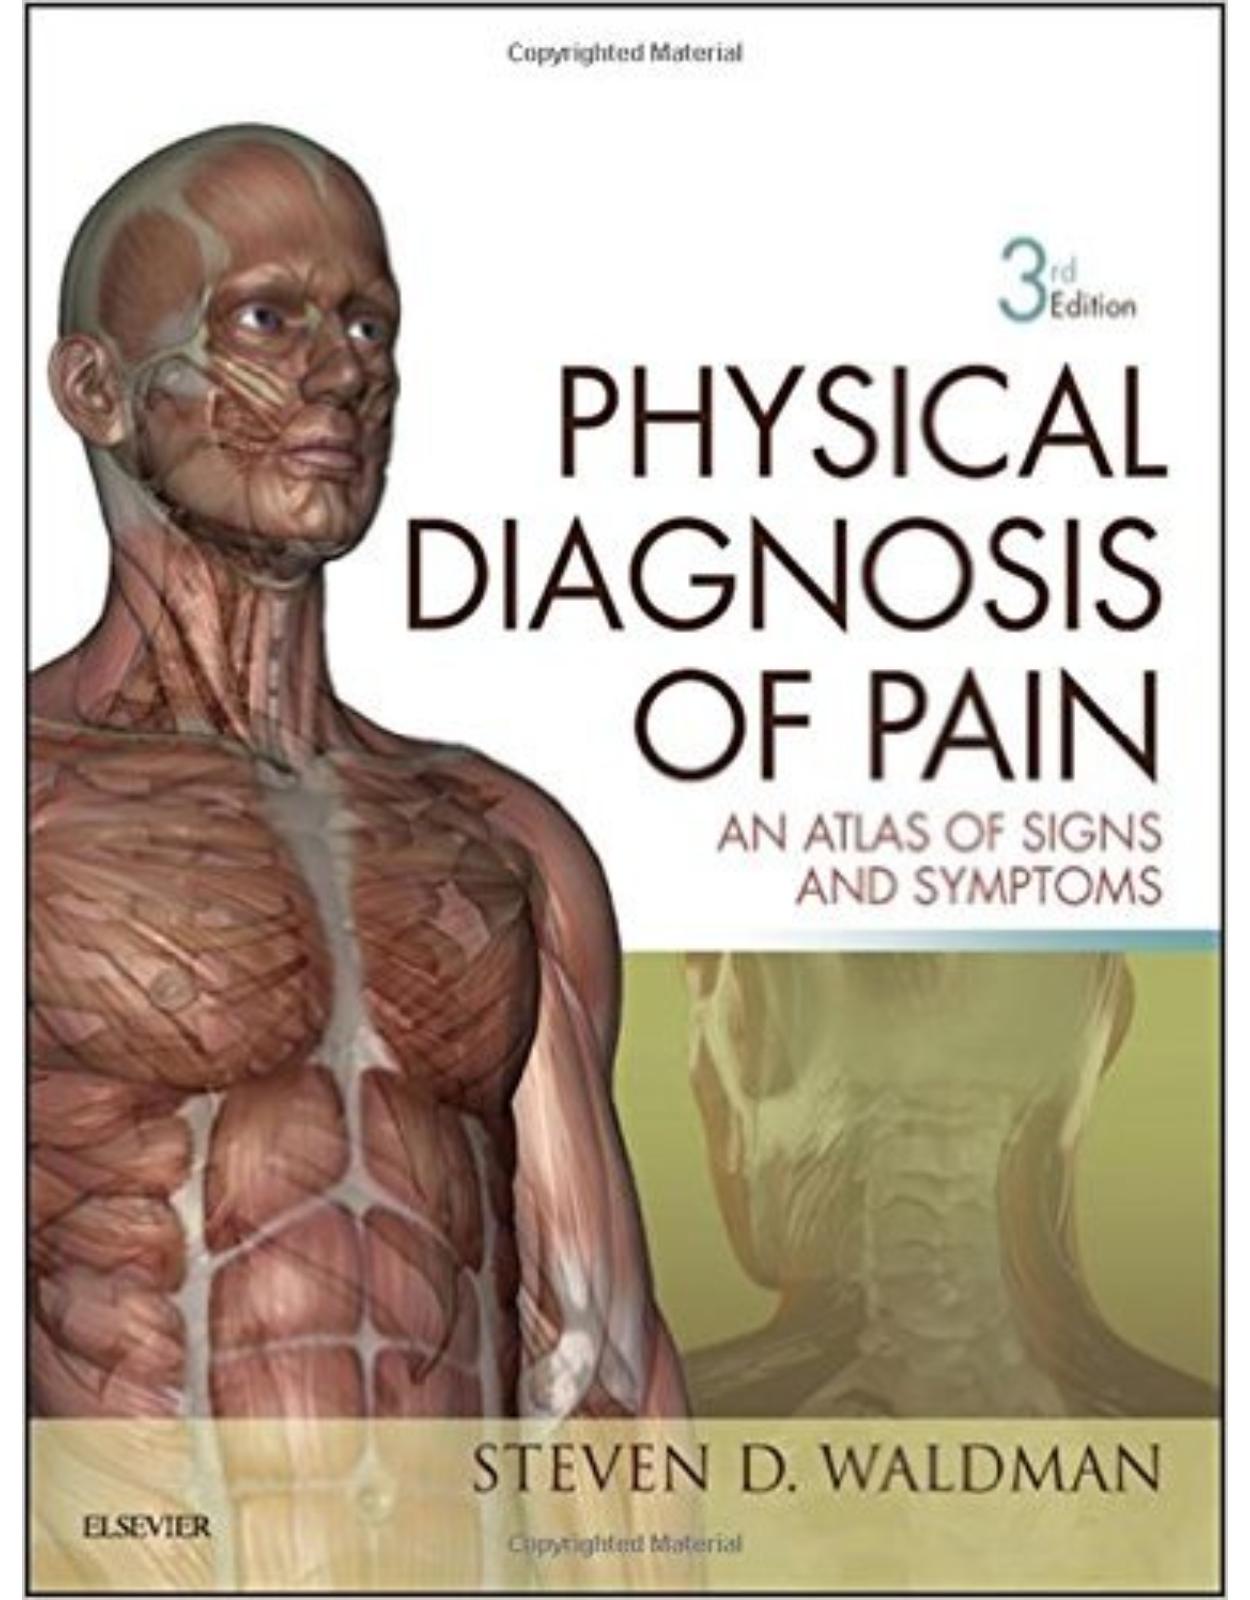 Physical Diagnosis of Pain: An Atlas of Signs and Symptoms, 3e